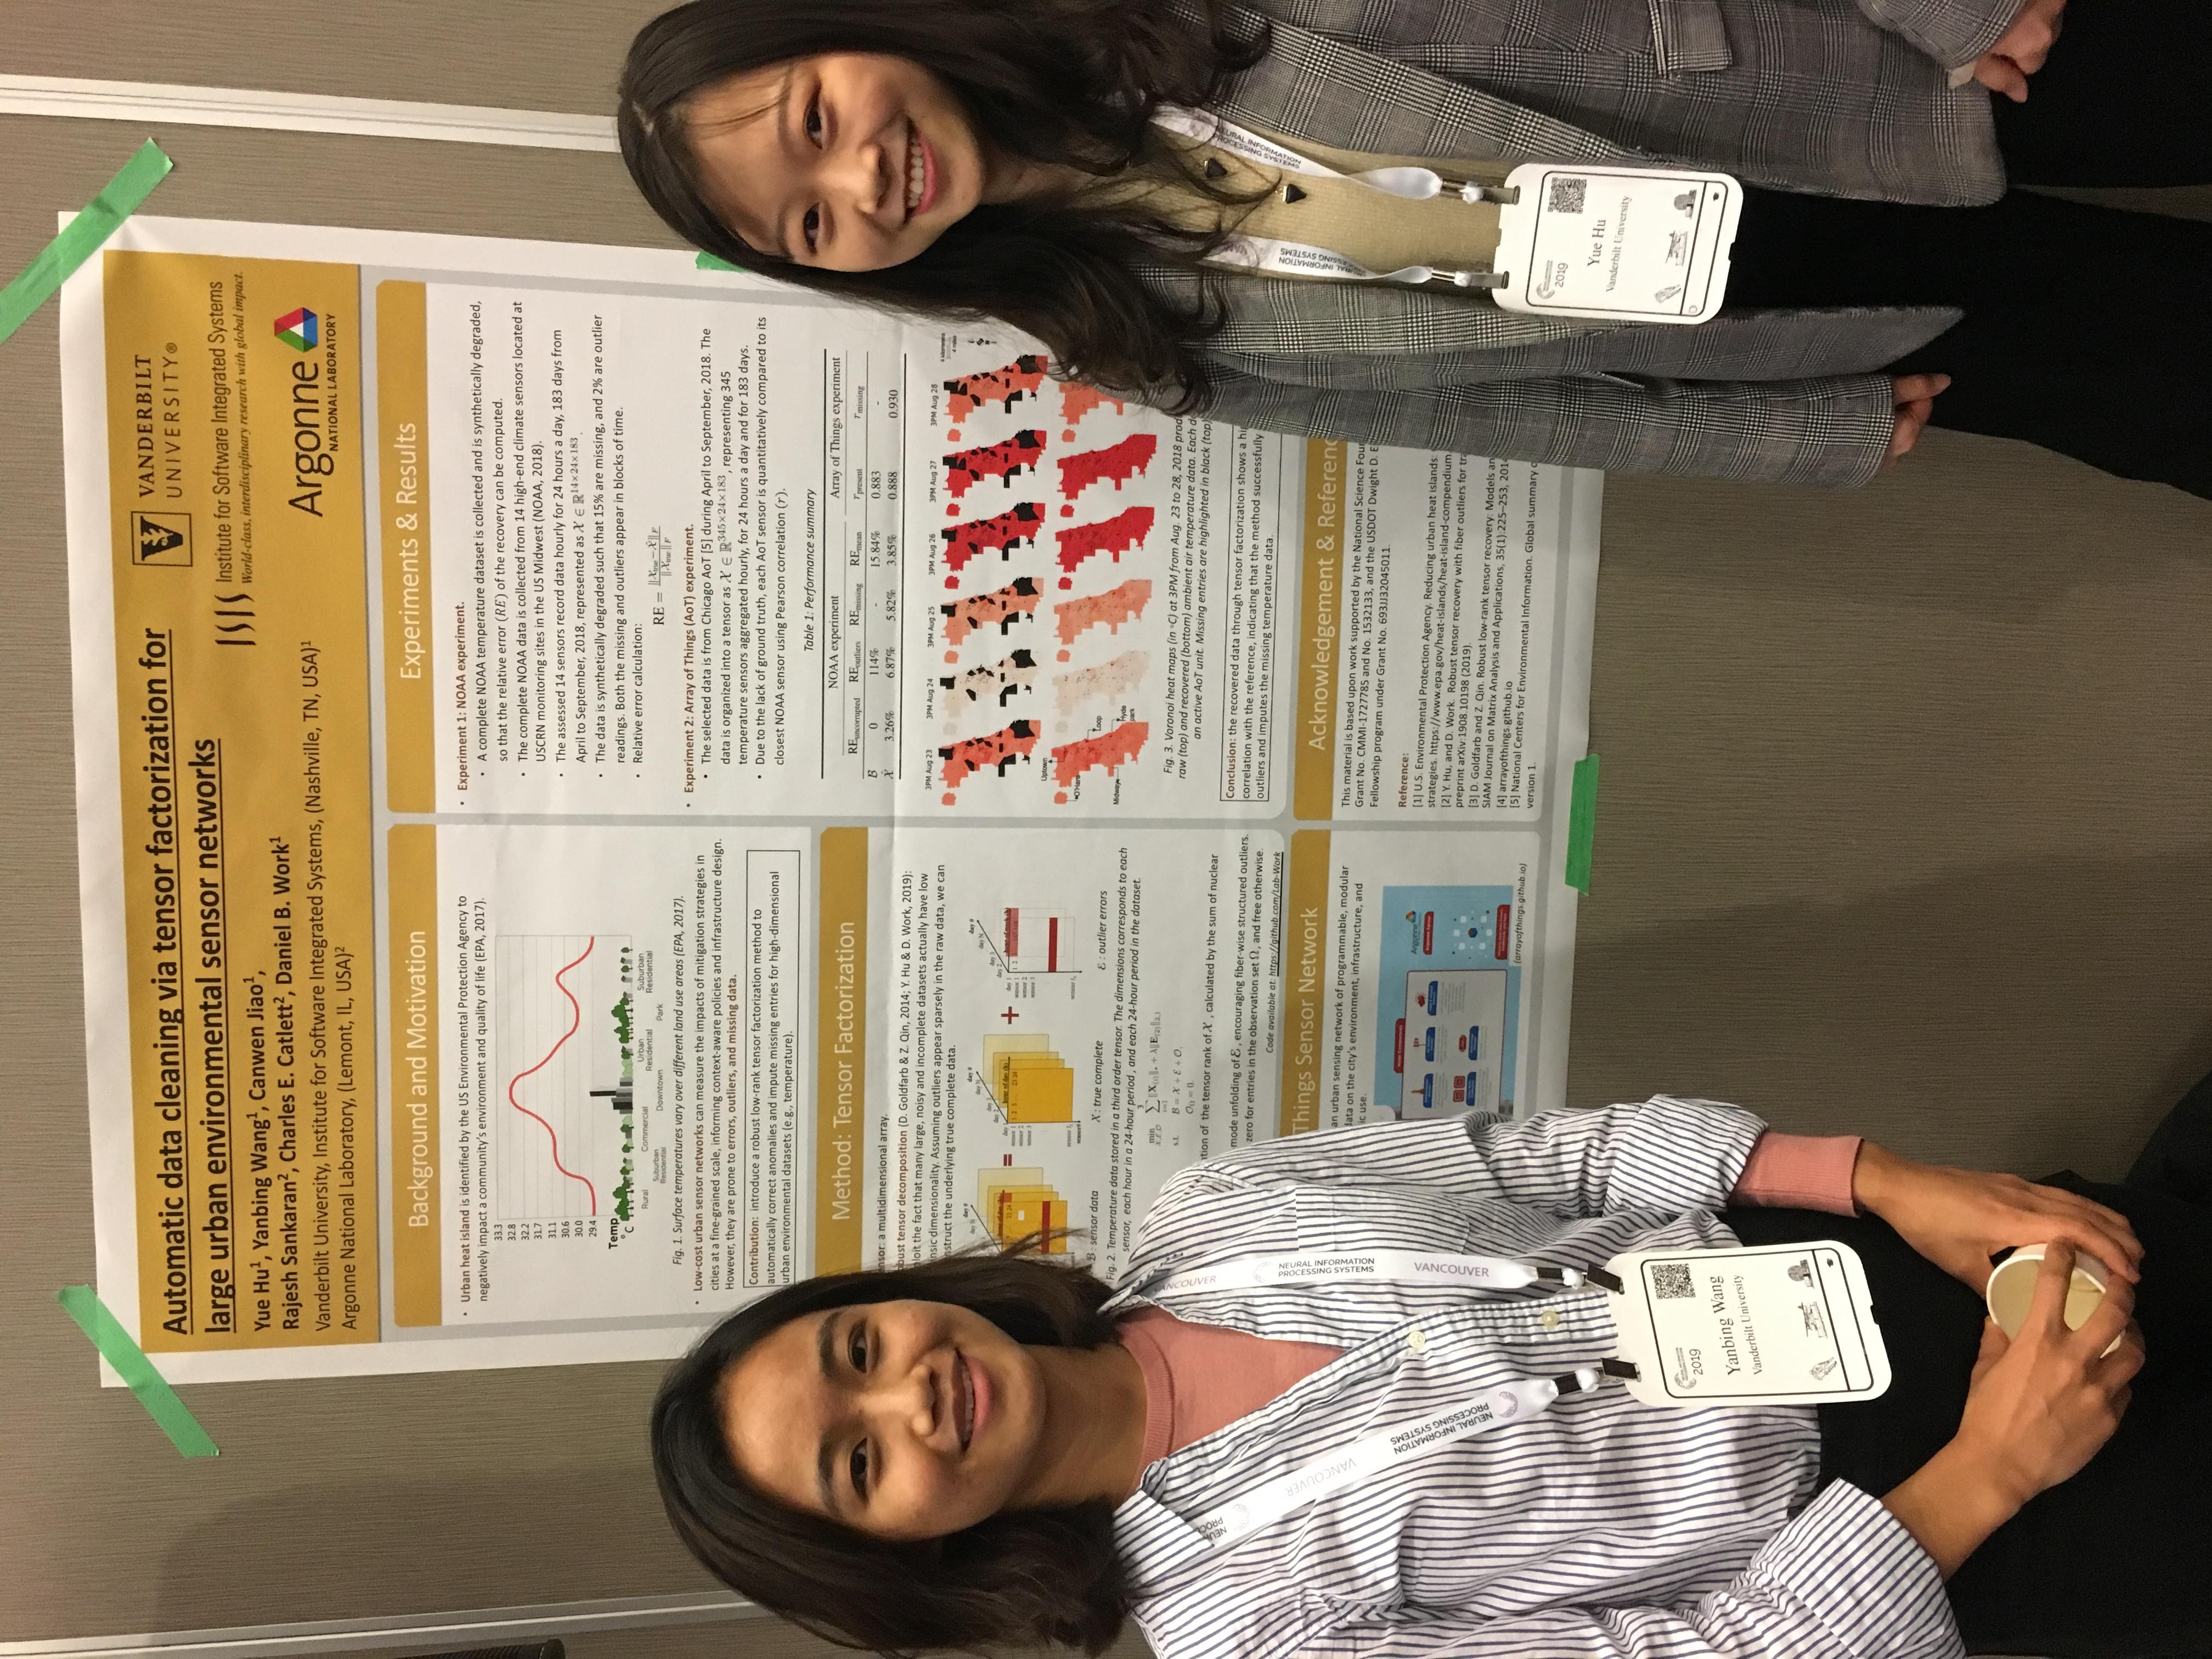 Yue Hu and I presented at NeurIPS workshop 2019